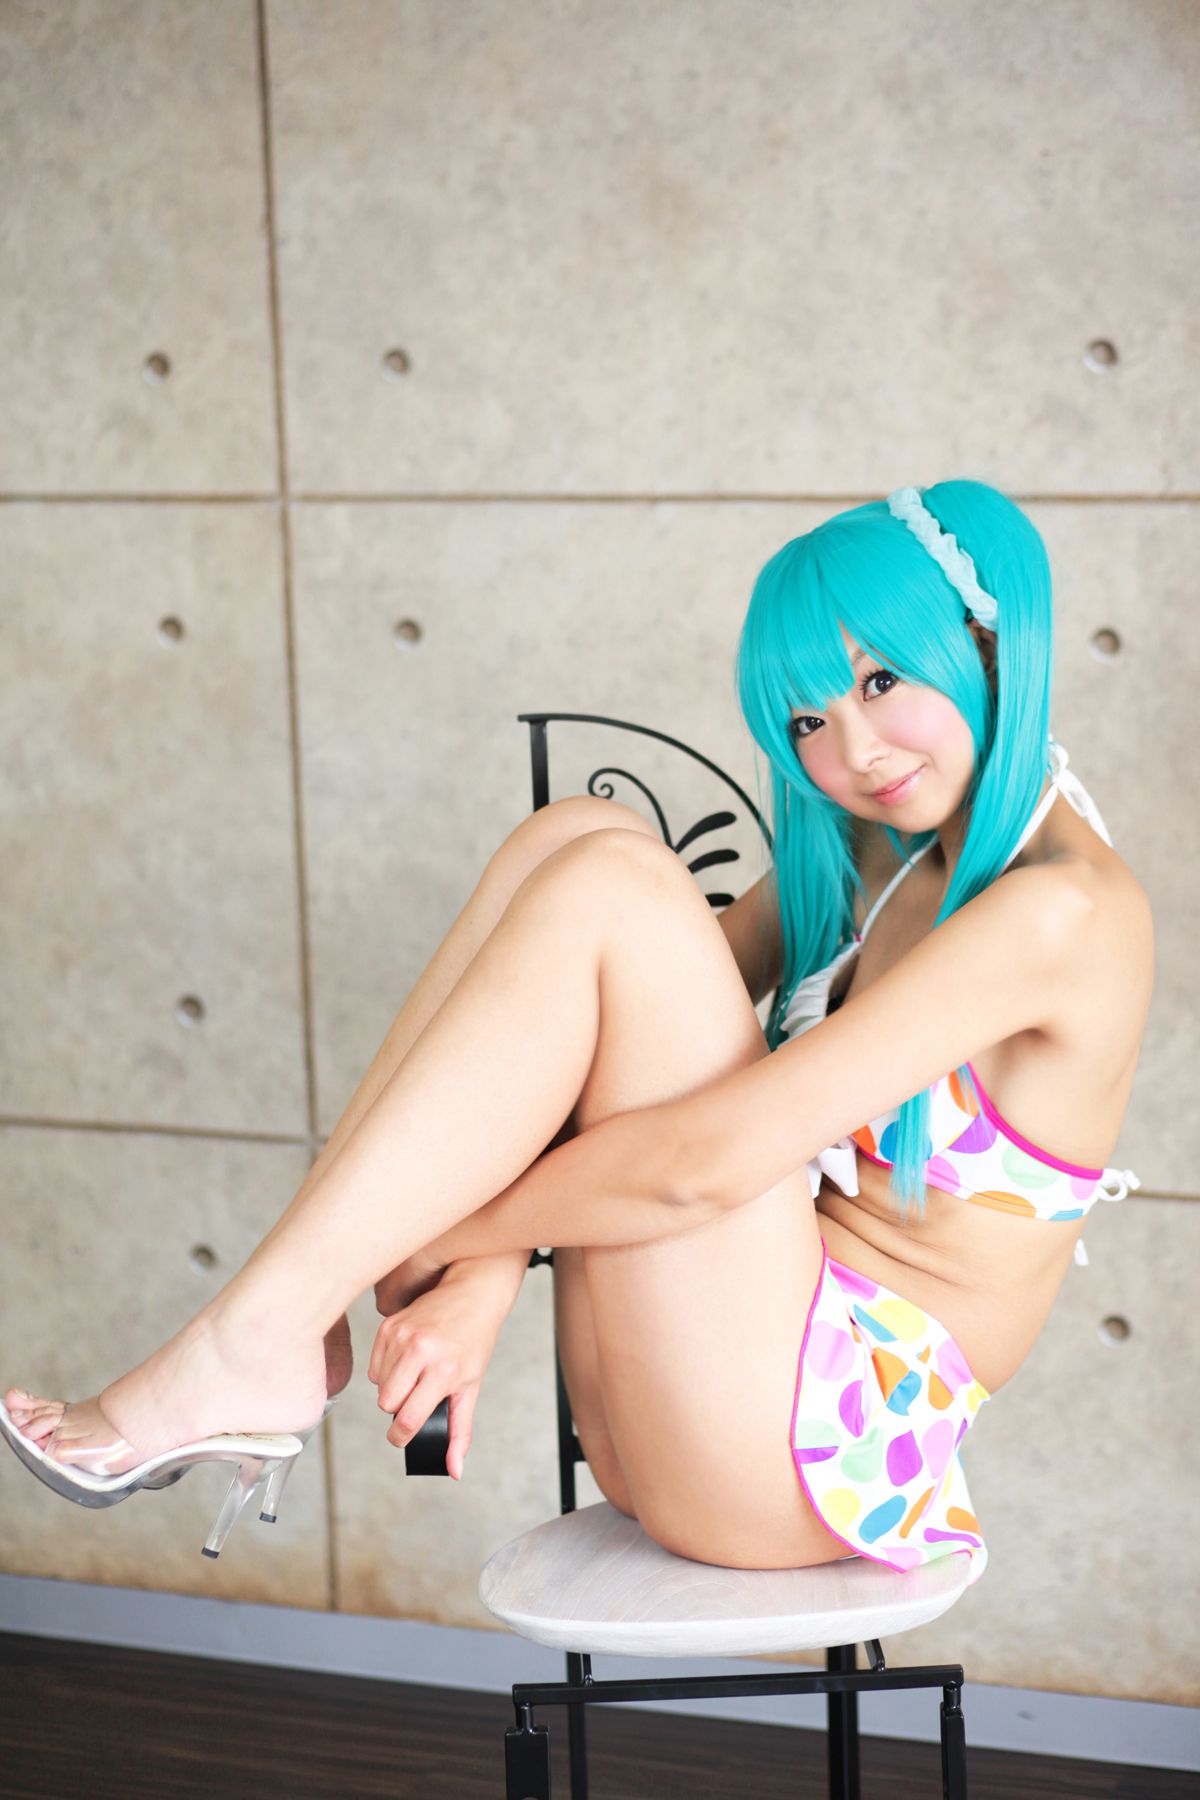 taotuhome[Cosplay] Necoco as Hatsune Miku from Vocaloid 套图第5张